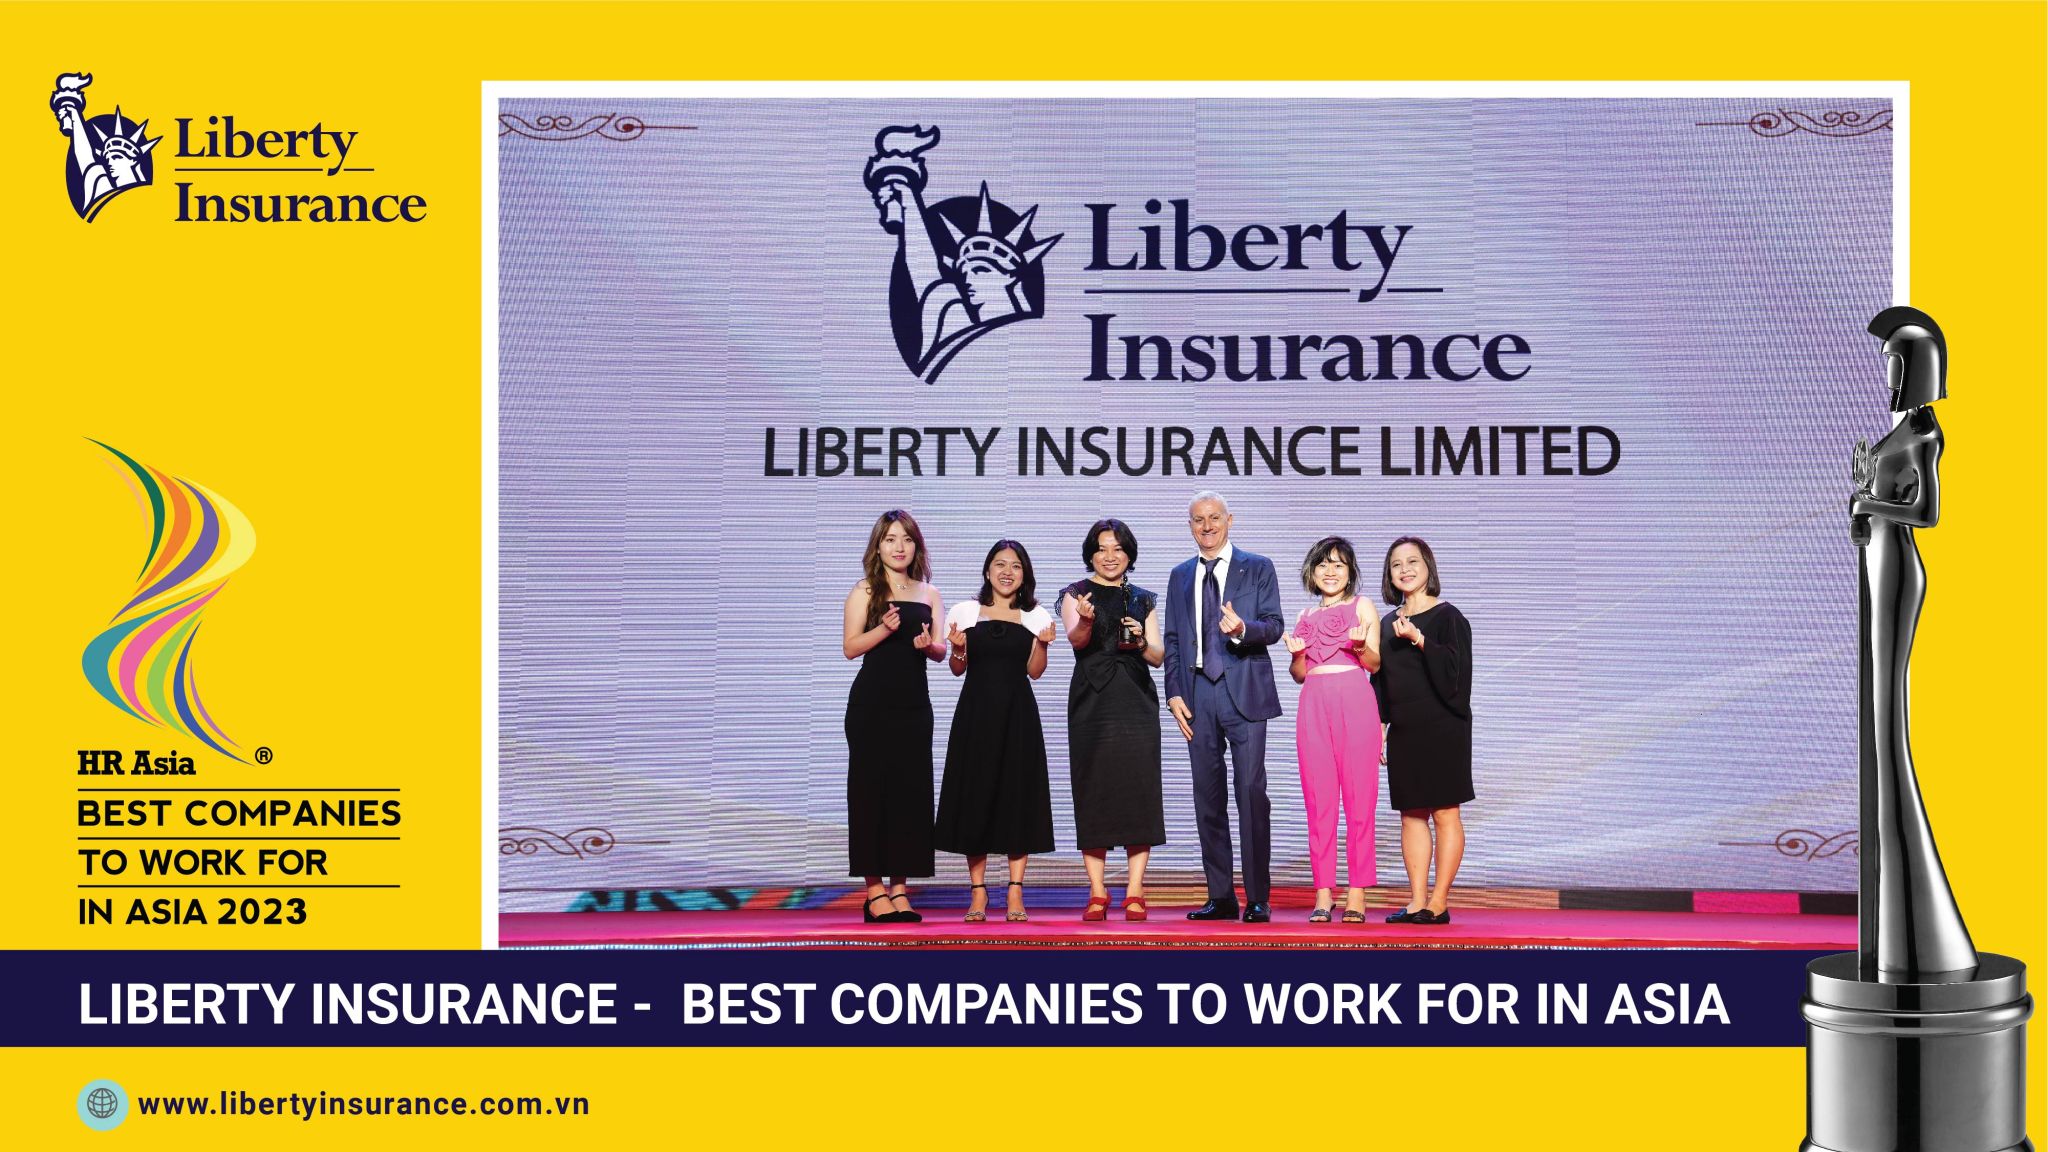 HR Asia Best Companies to Work for - Liberty Insurance